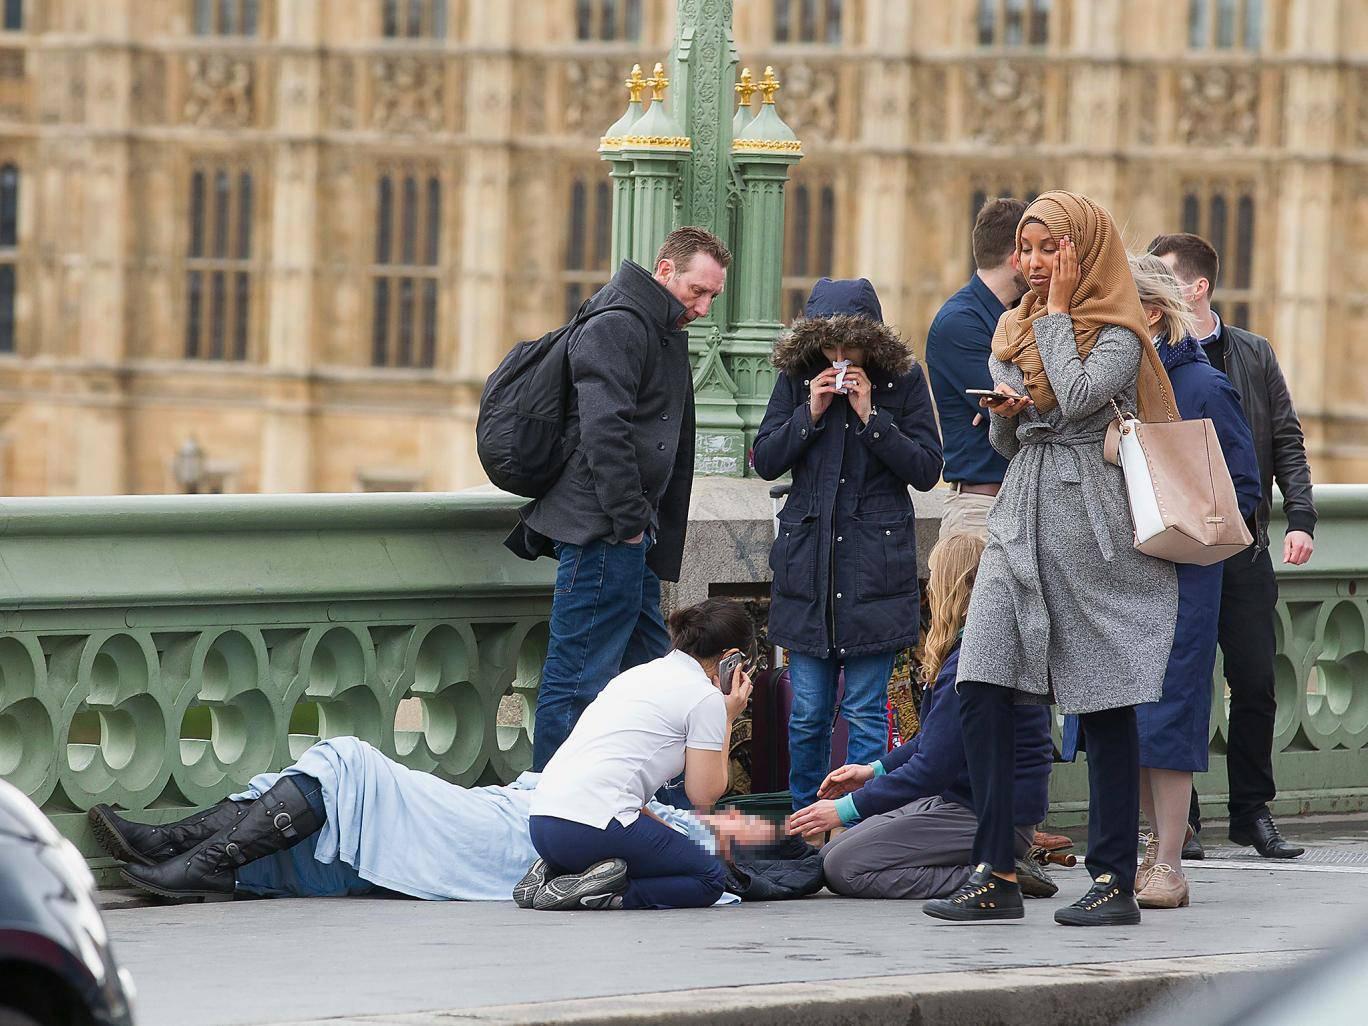 Man who posted image of Muslim woman &apos;ignoring Westminster terror victims&apos; was a Russian troll